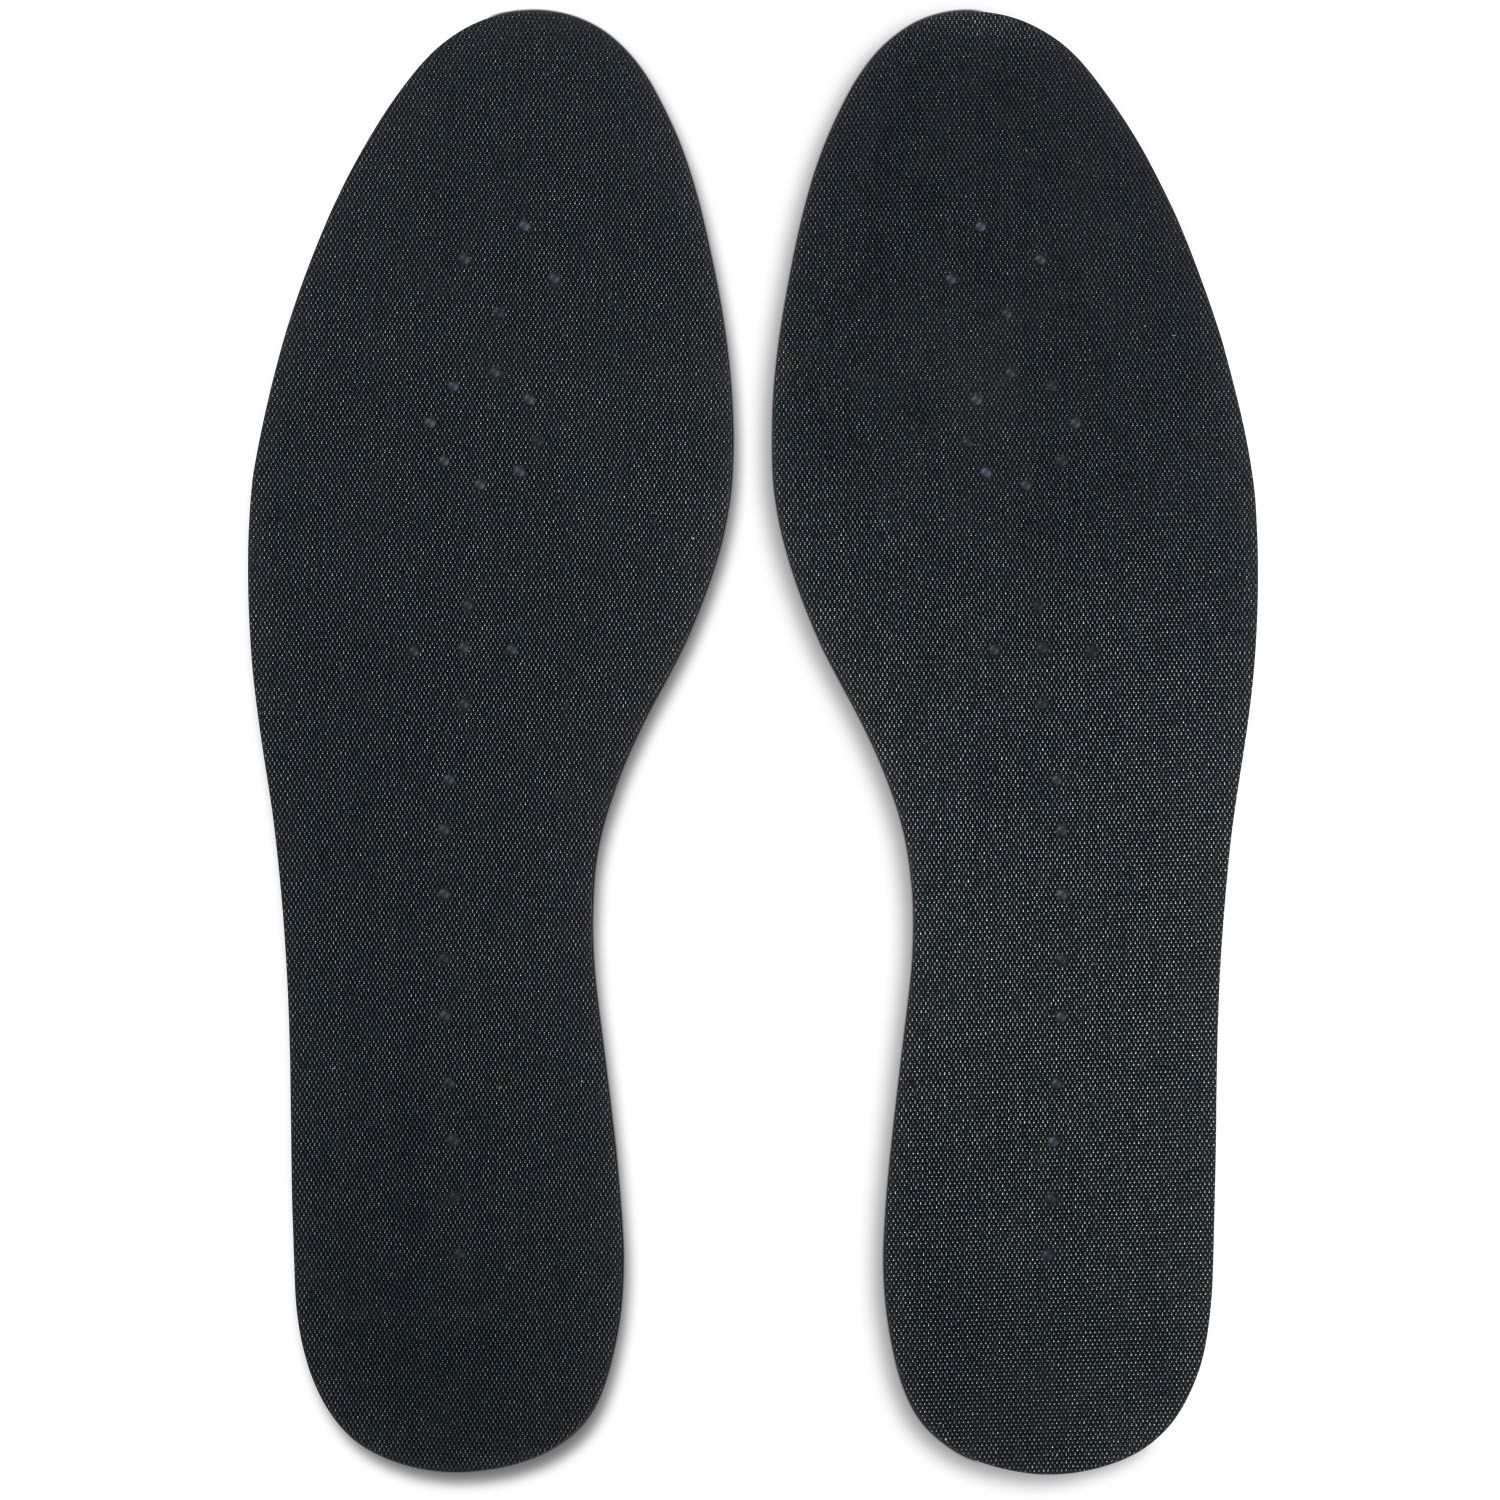 solelution cycling insoles both insoles